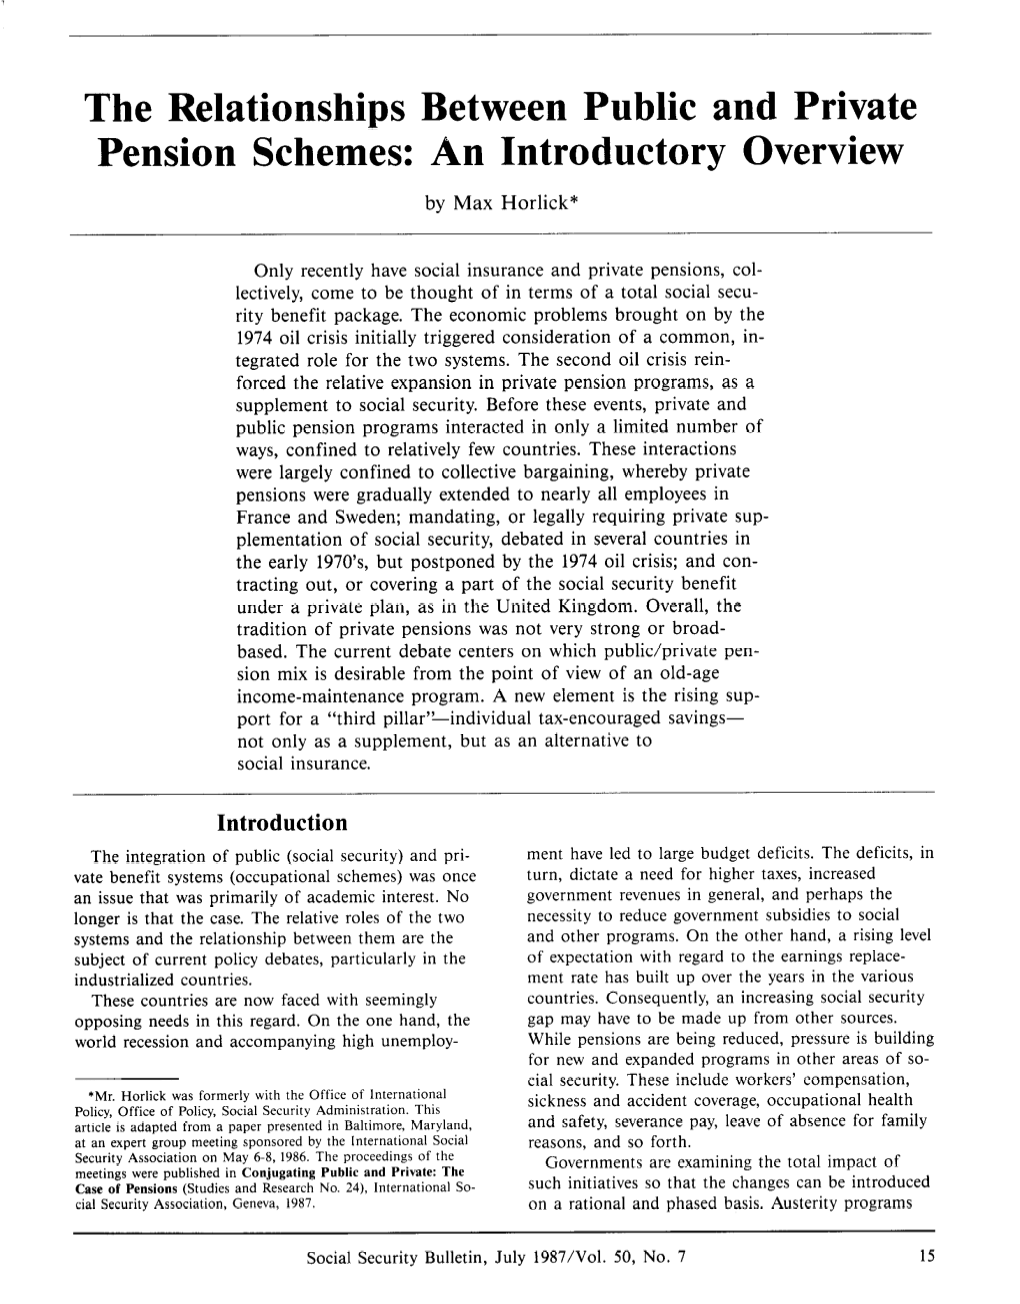 The Relationships Between Public and Private Pension Schemes: an Introductory Overview